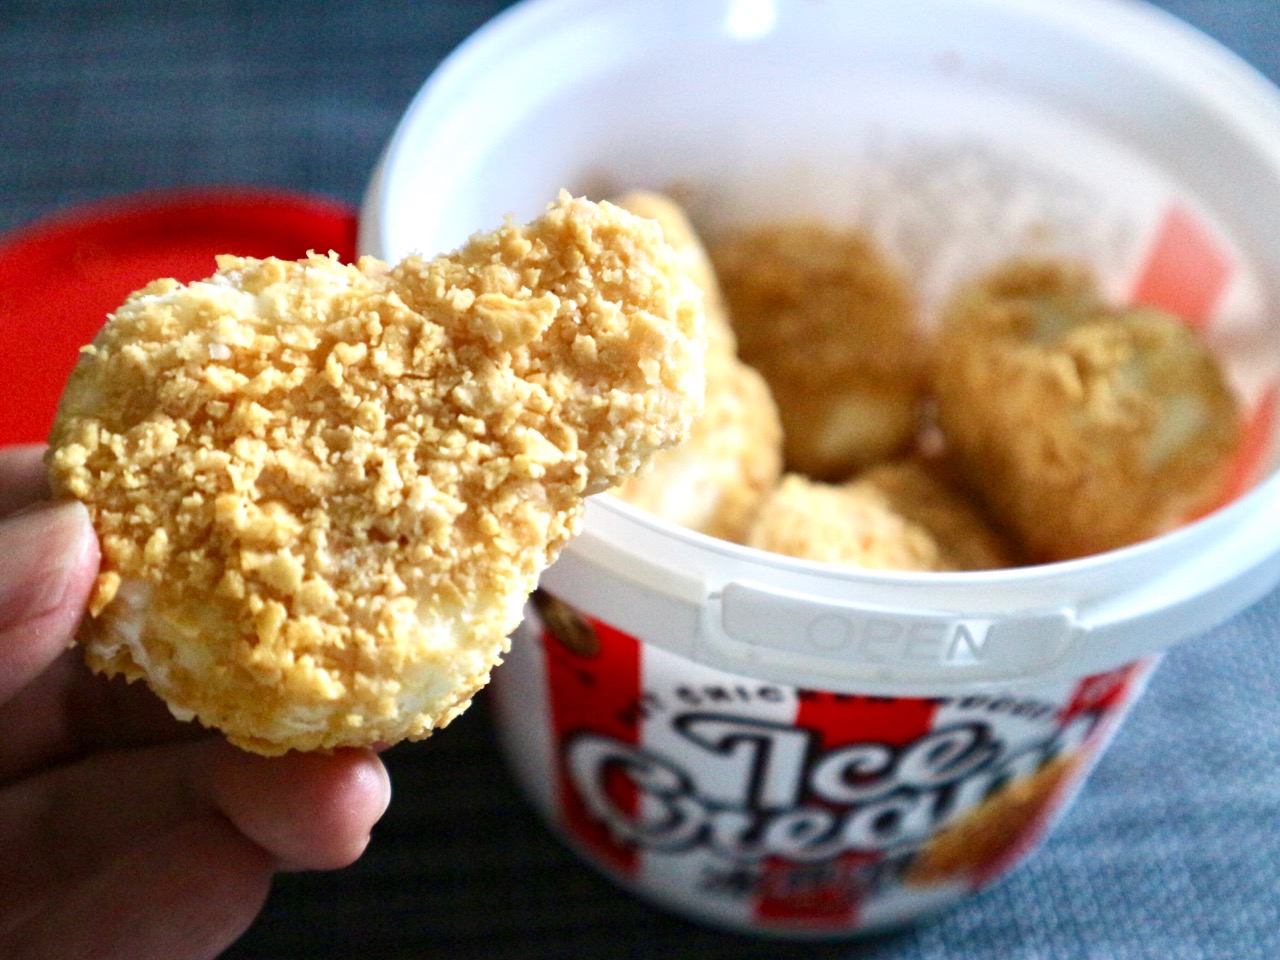 Japan Is Trying To Make Fried Chicken Ice Cream A Thing -Check Out